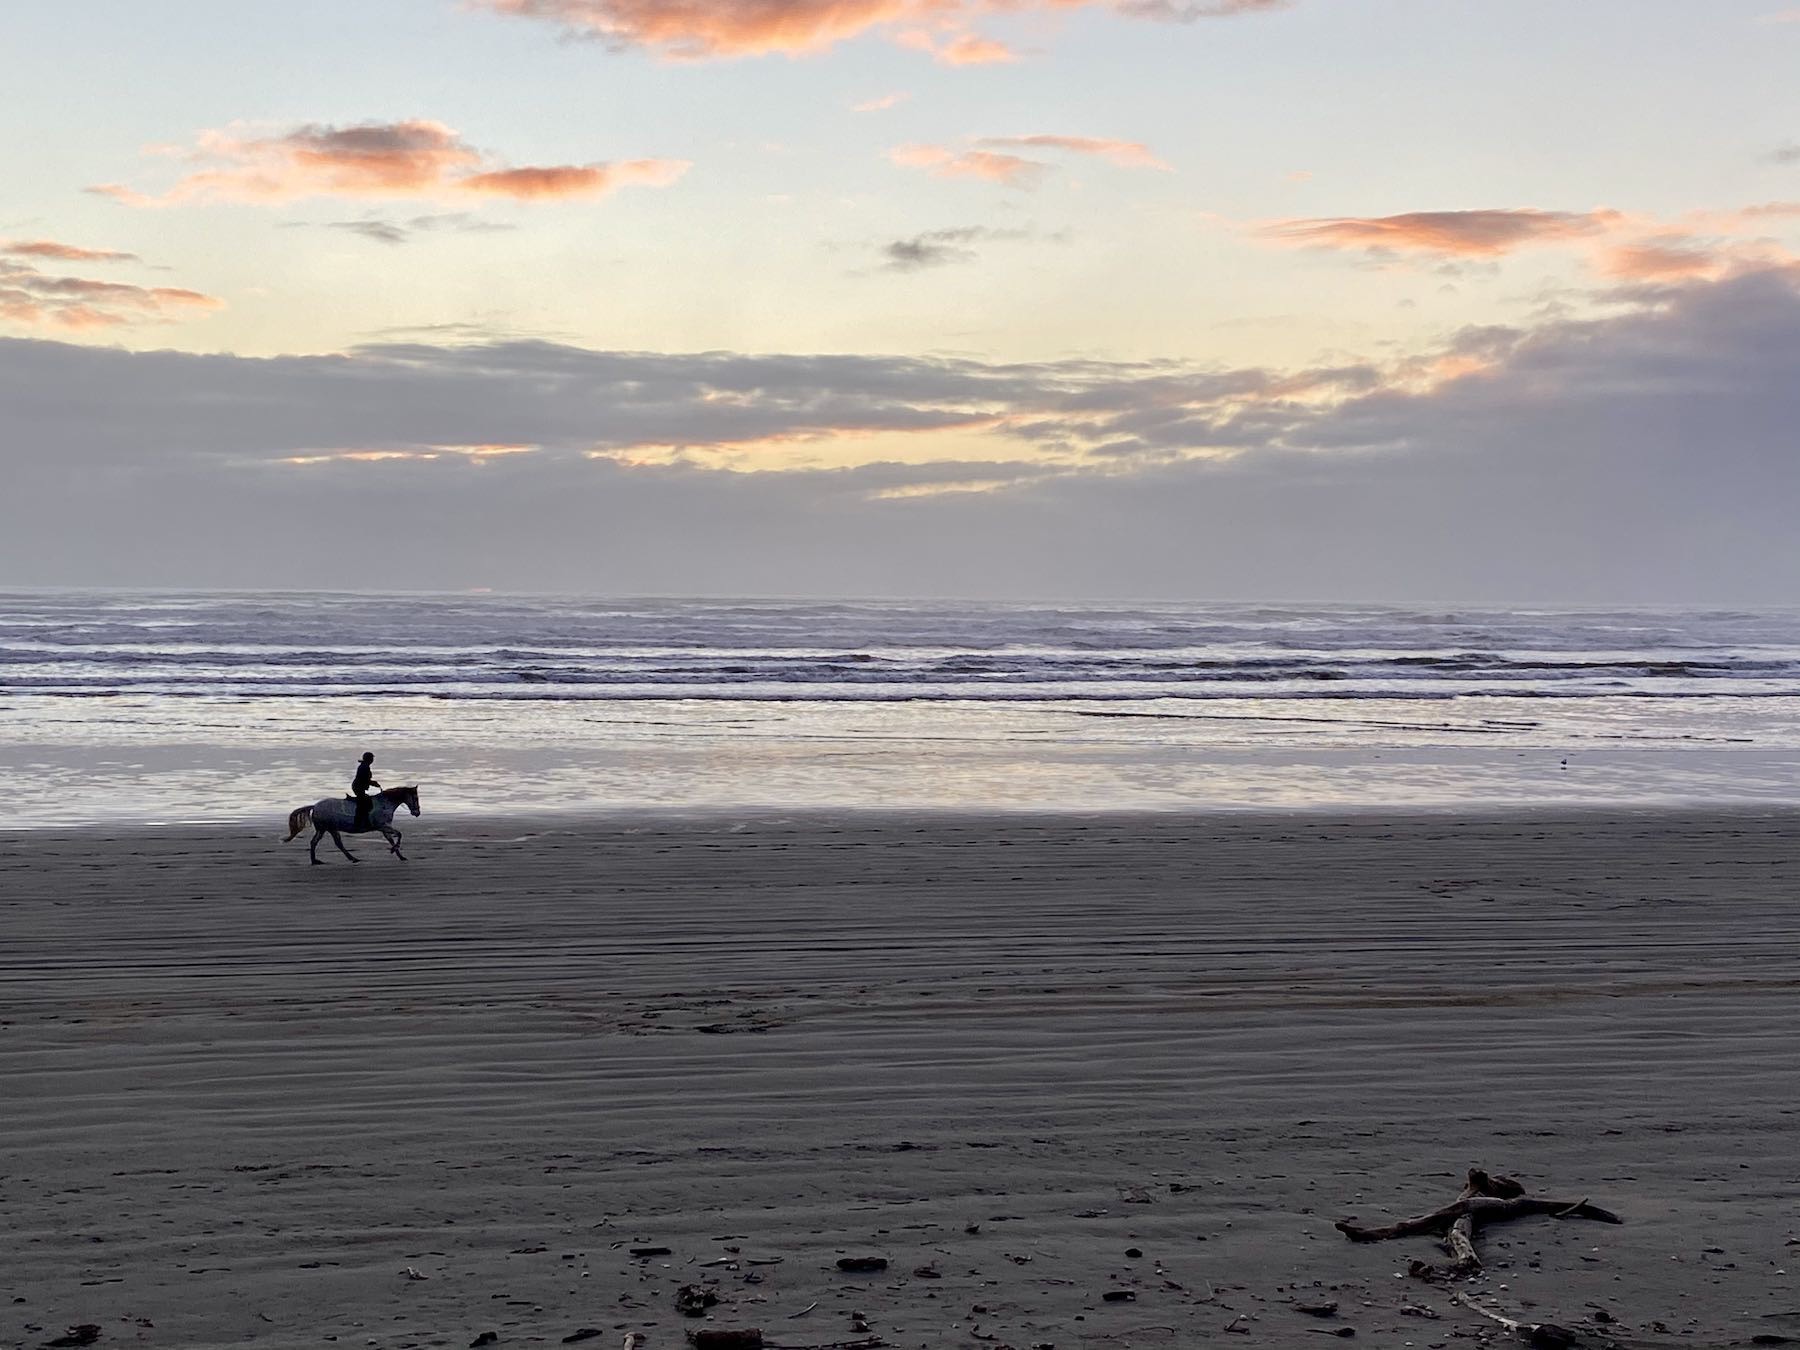 Horse at the edge of the sea, with rider standing up on the stirrups. 